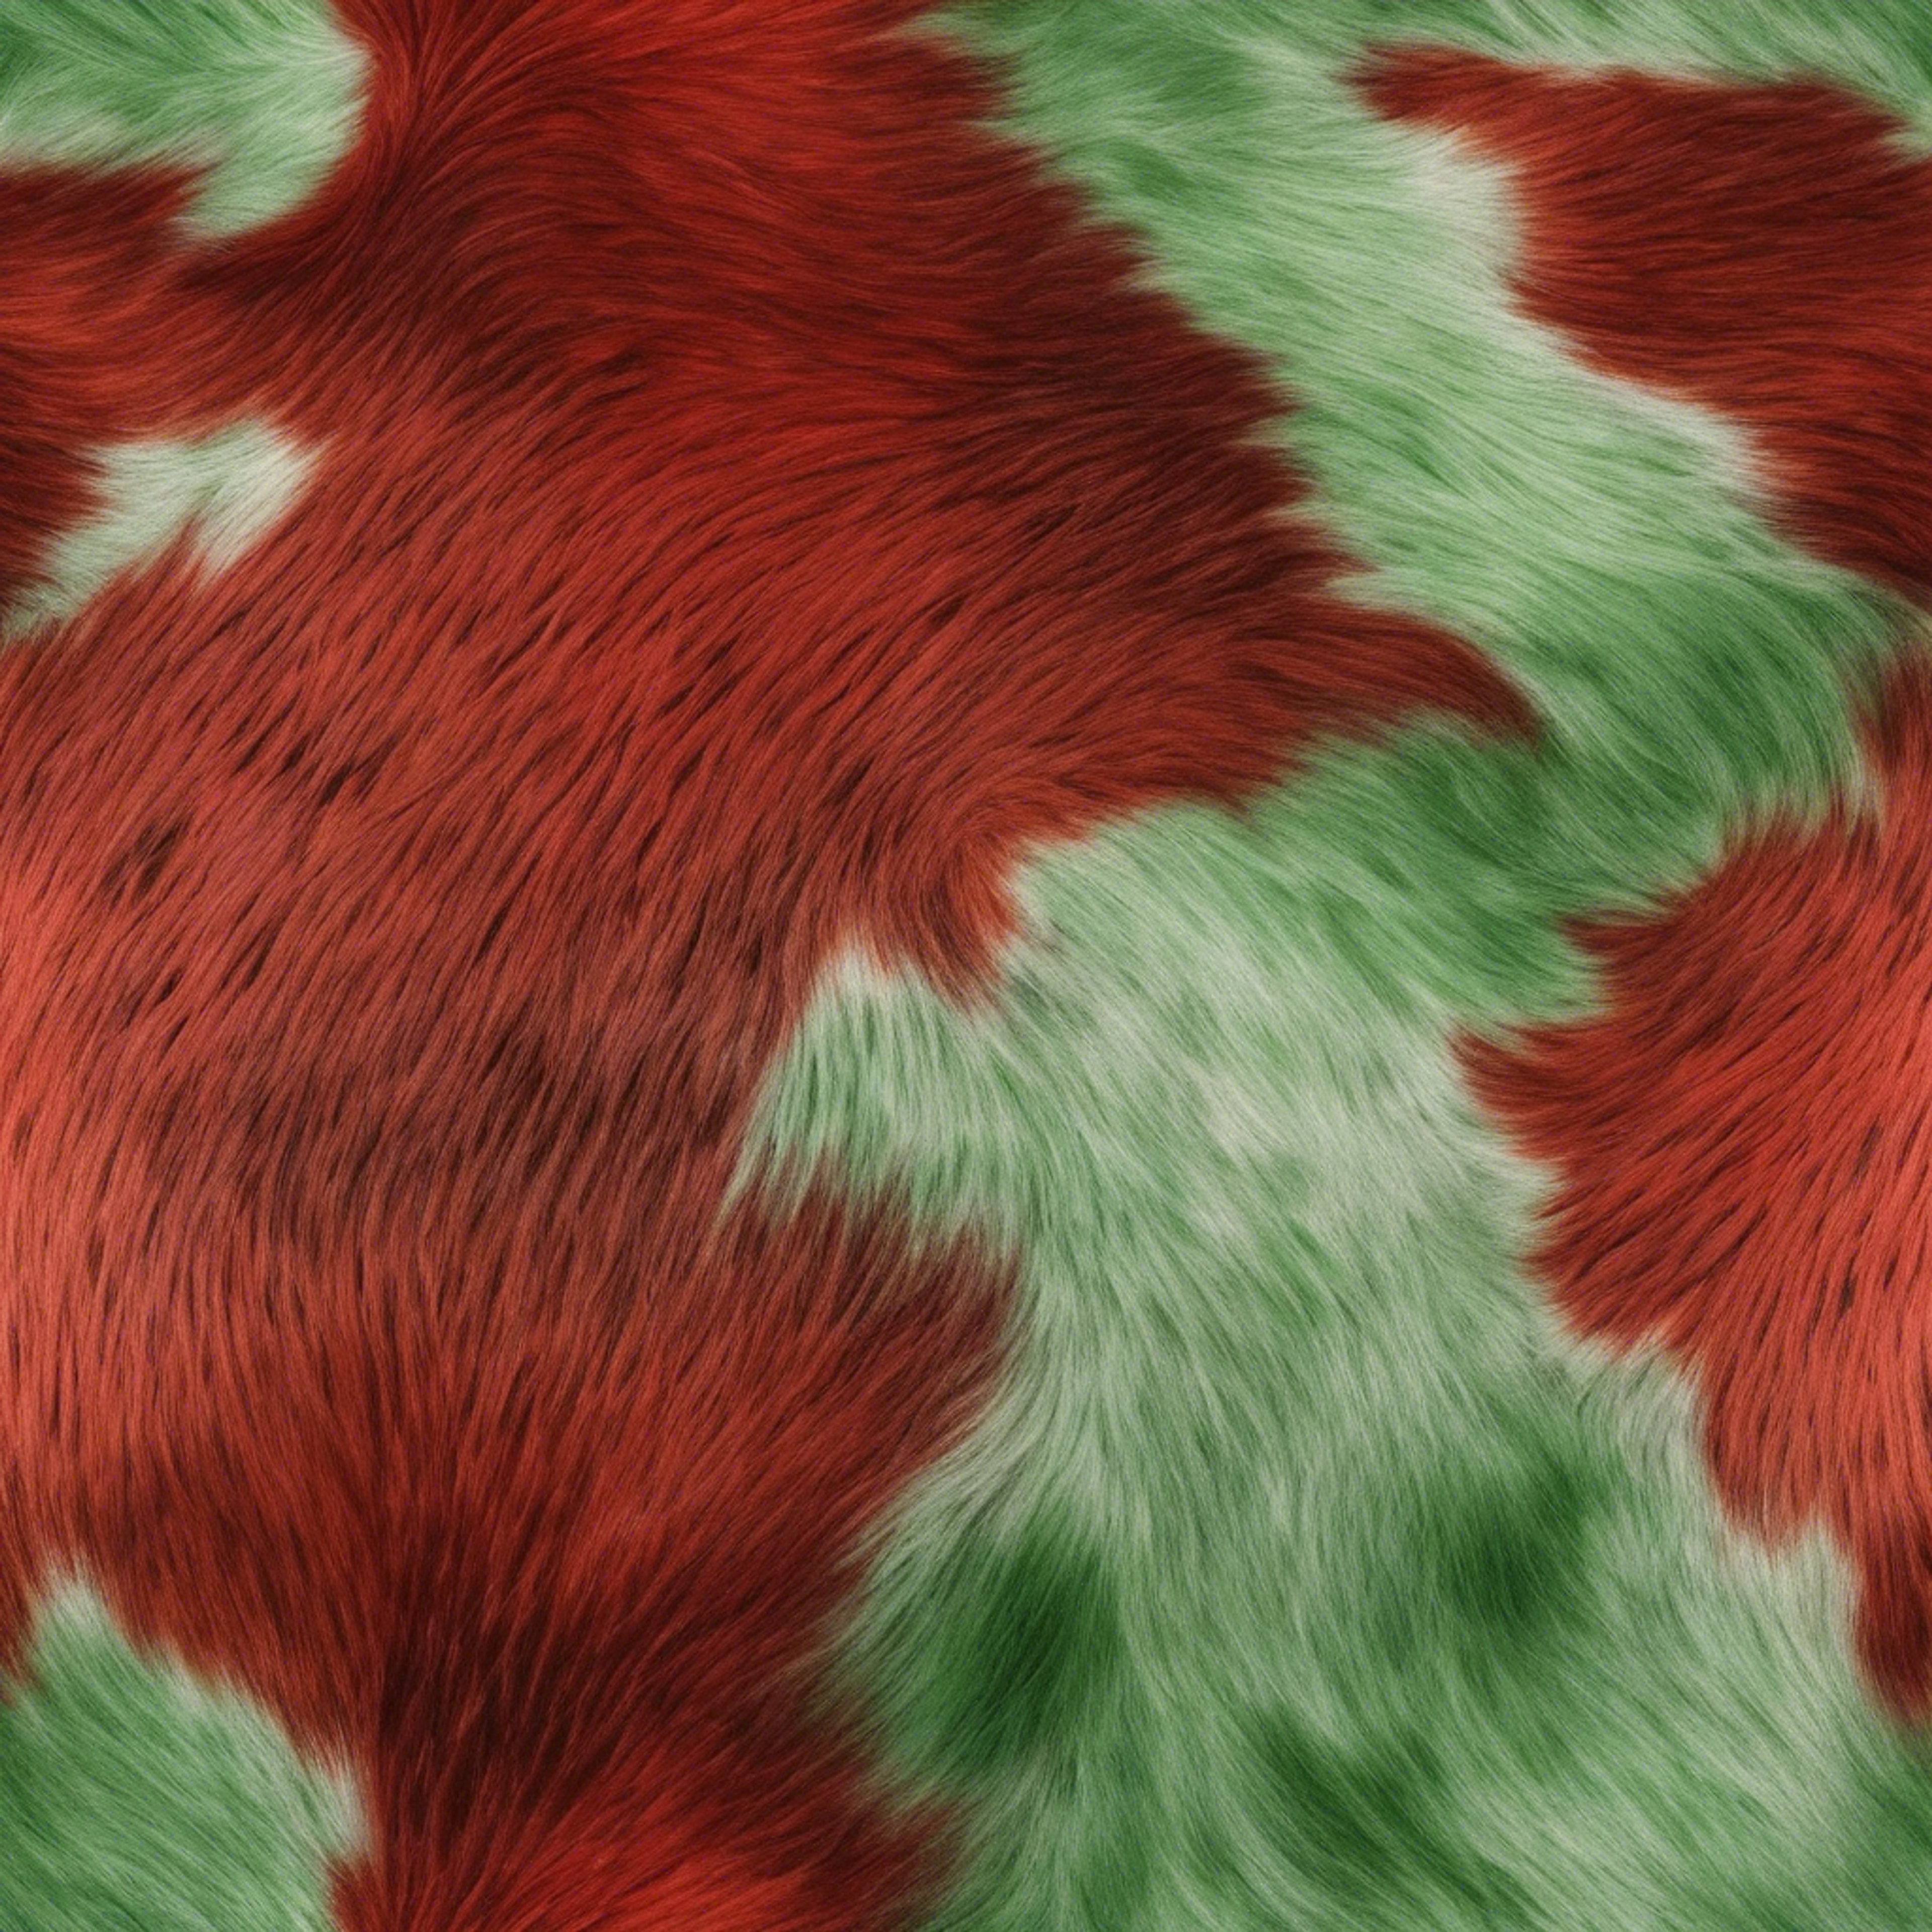 Seamless cowhide pattern art painted in bright red and green shades. Wallpaper[3aae93f0a1ee456daf96]